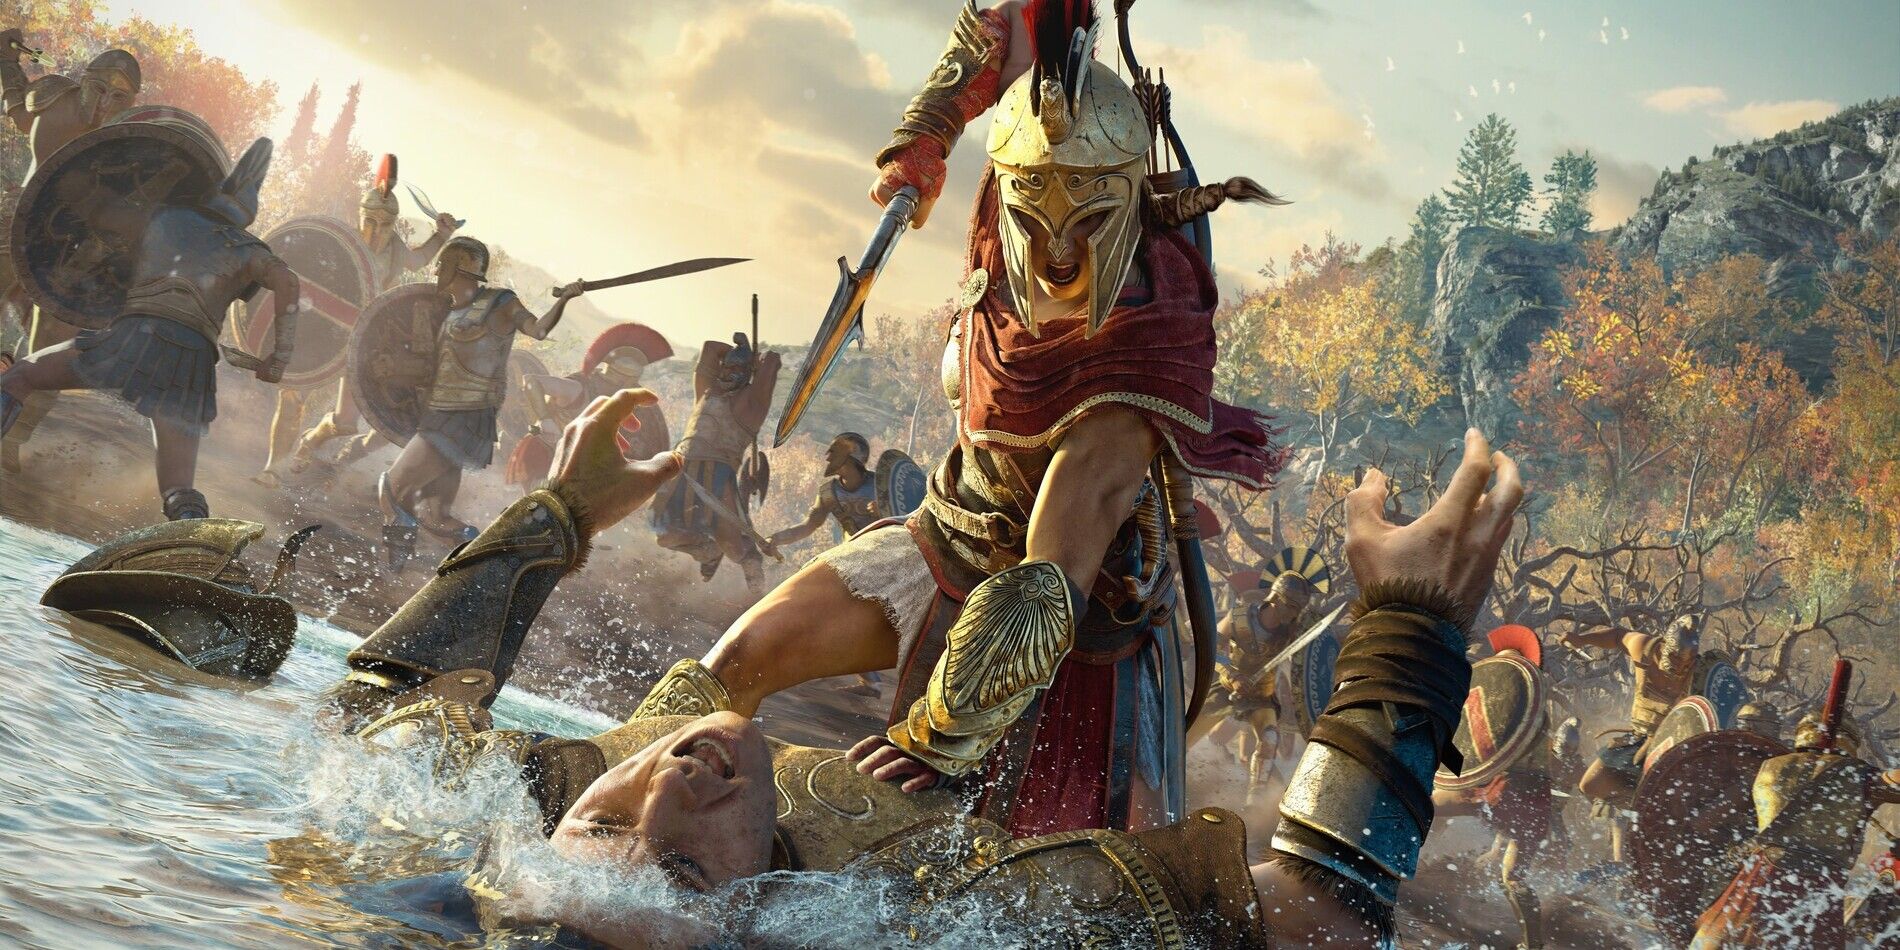 An image from Assassin's Creed Odyssey.